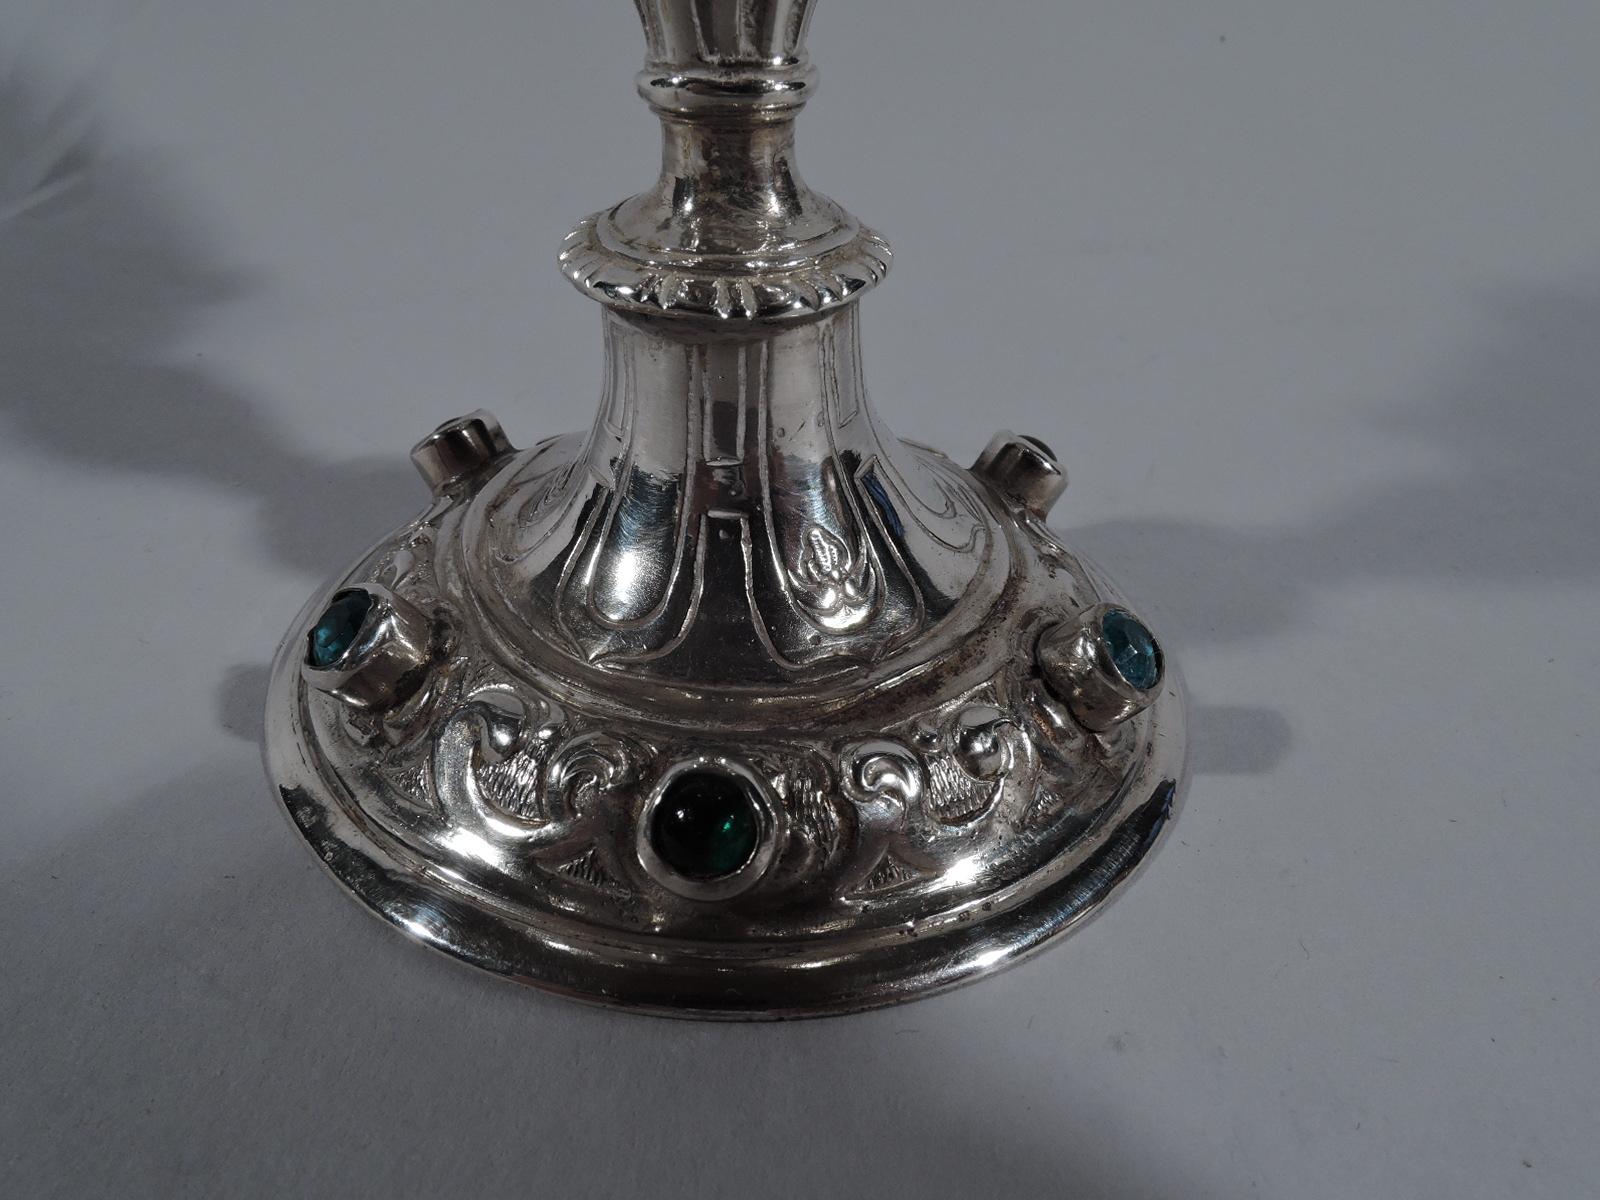 Early 20th Century Antique Sterling Silver Jeweled Goblet with English Import Marks